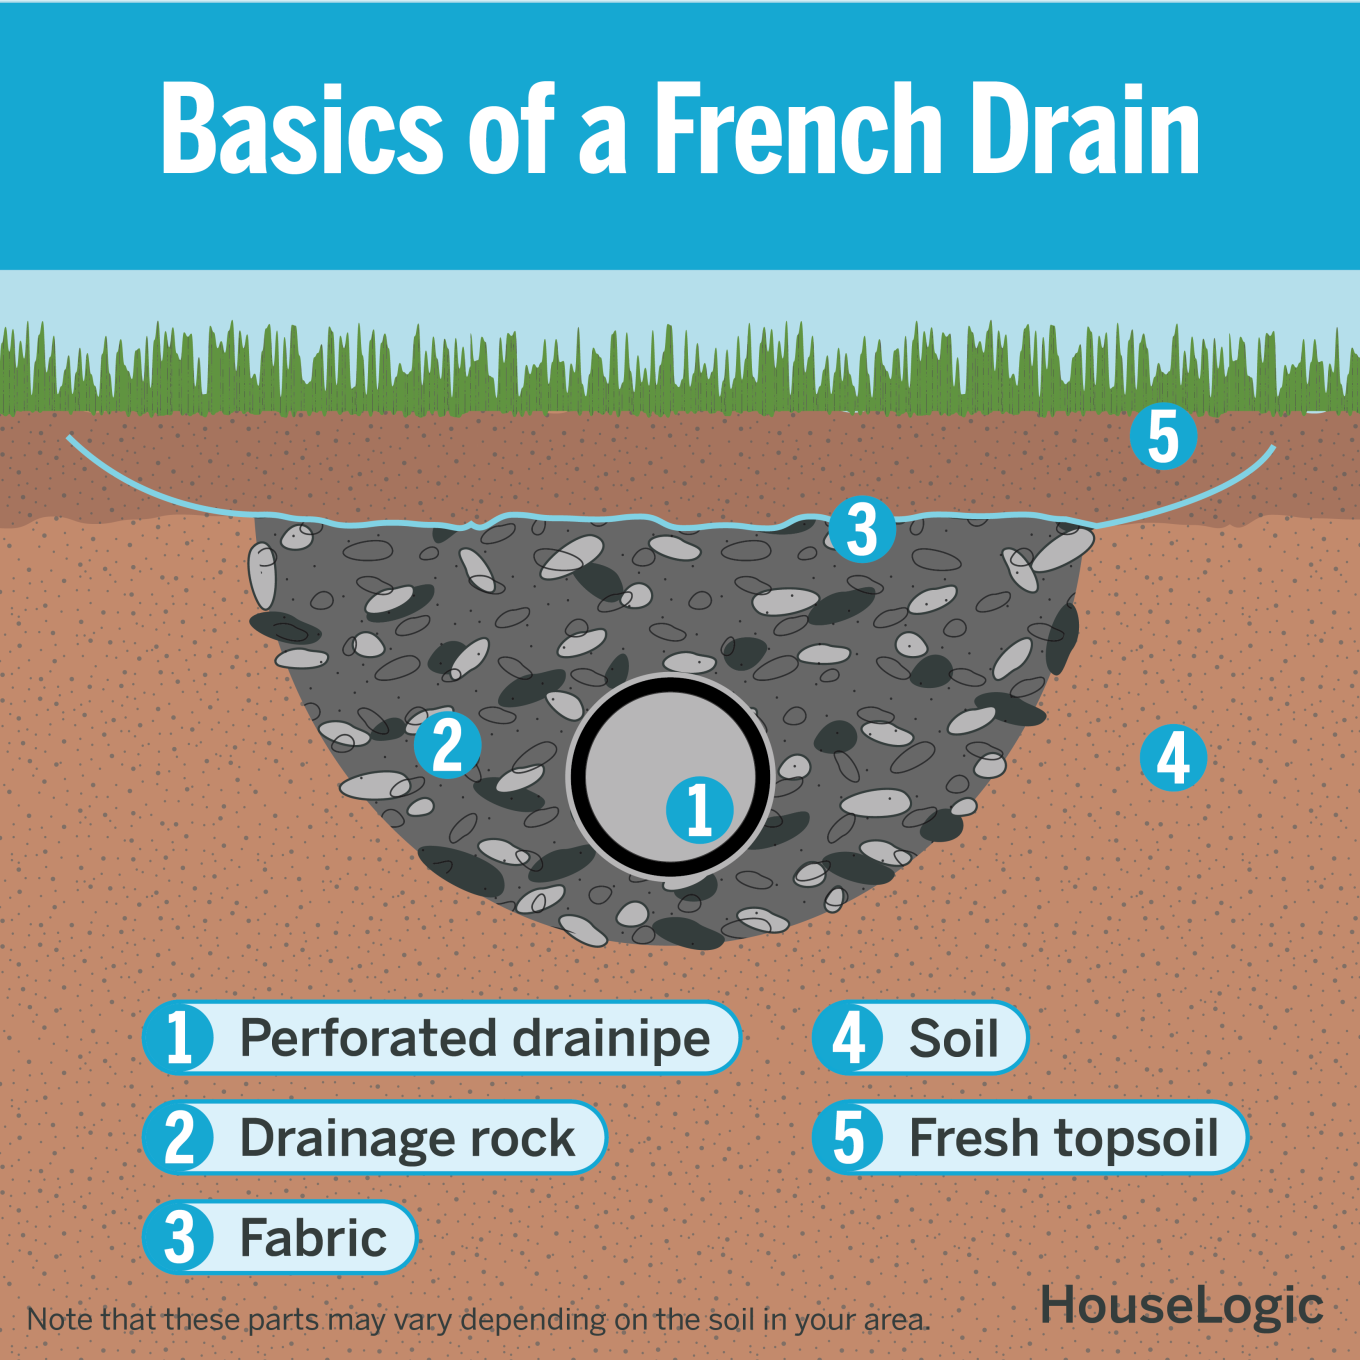 Graphic explaining the basics of a French Drain system.